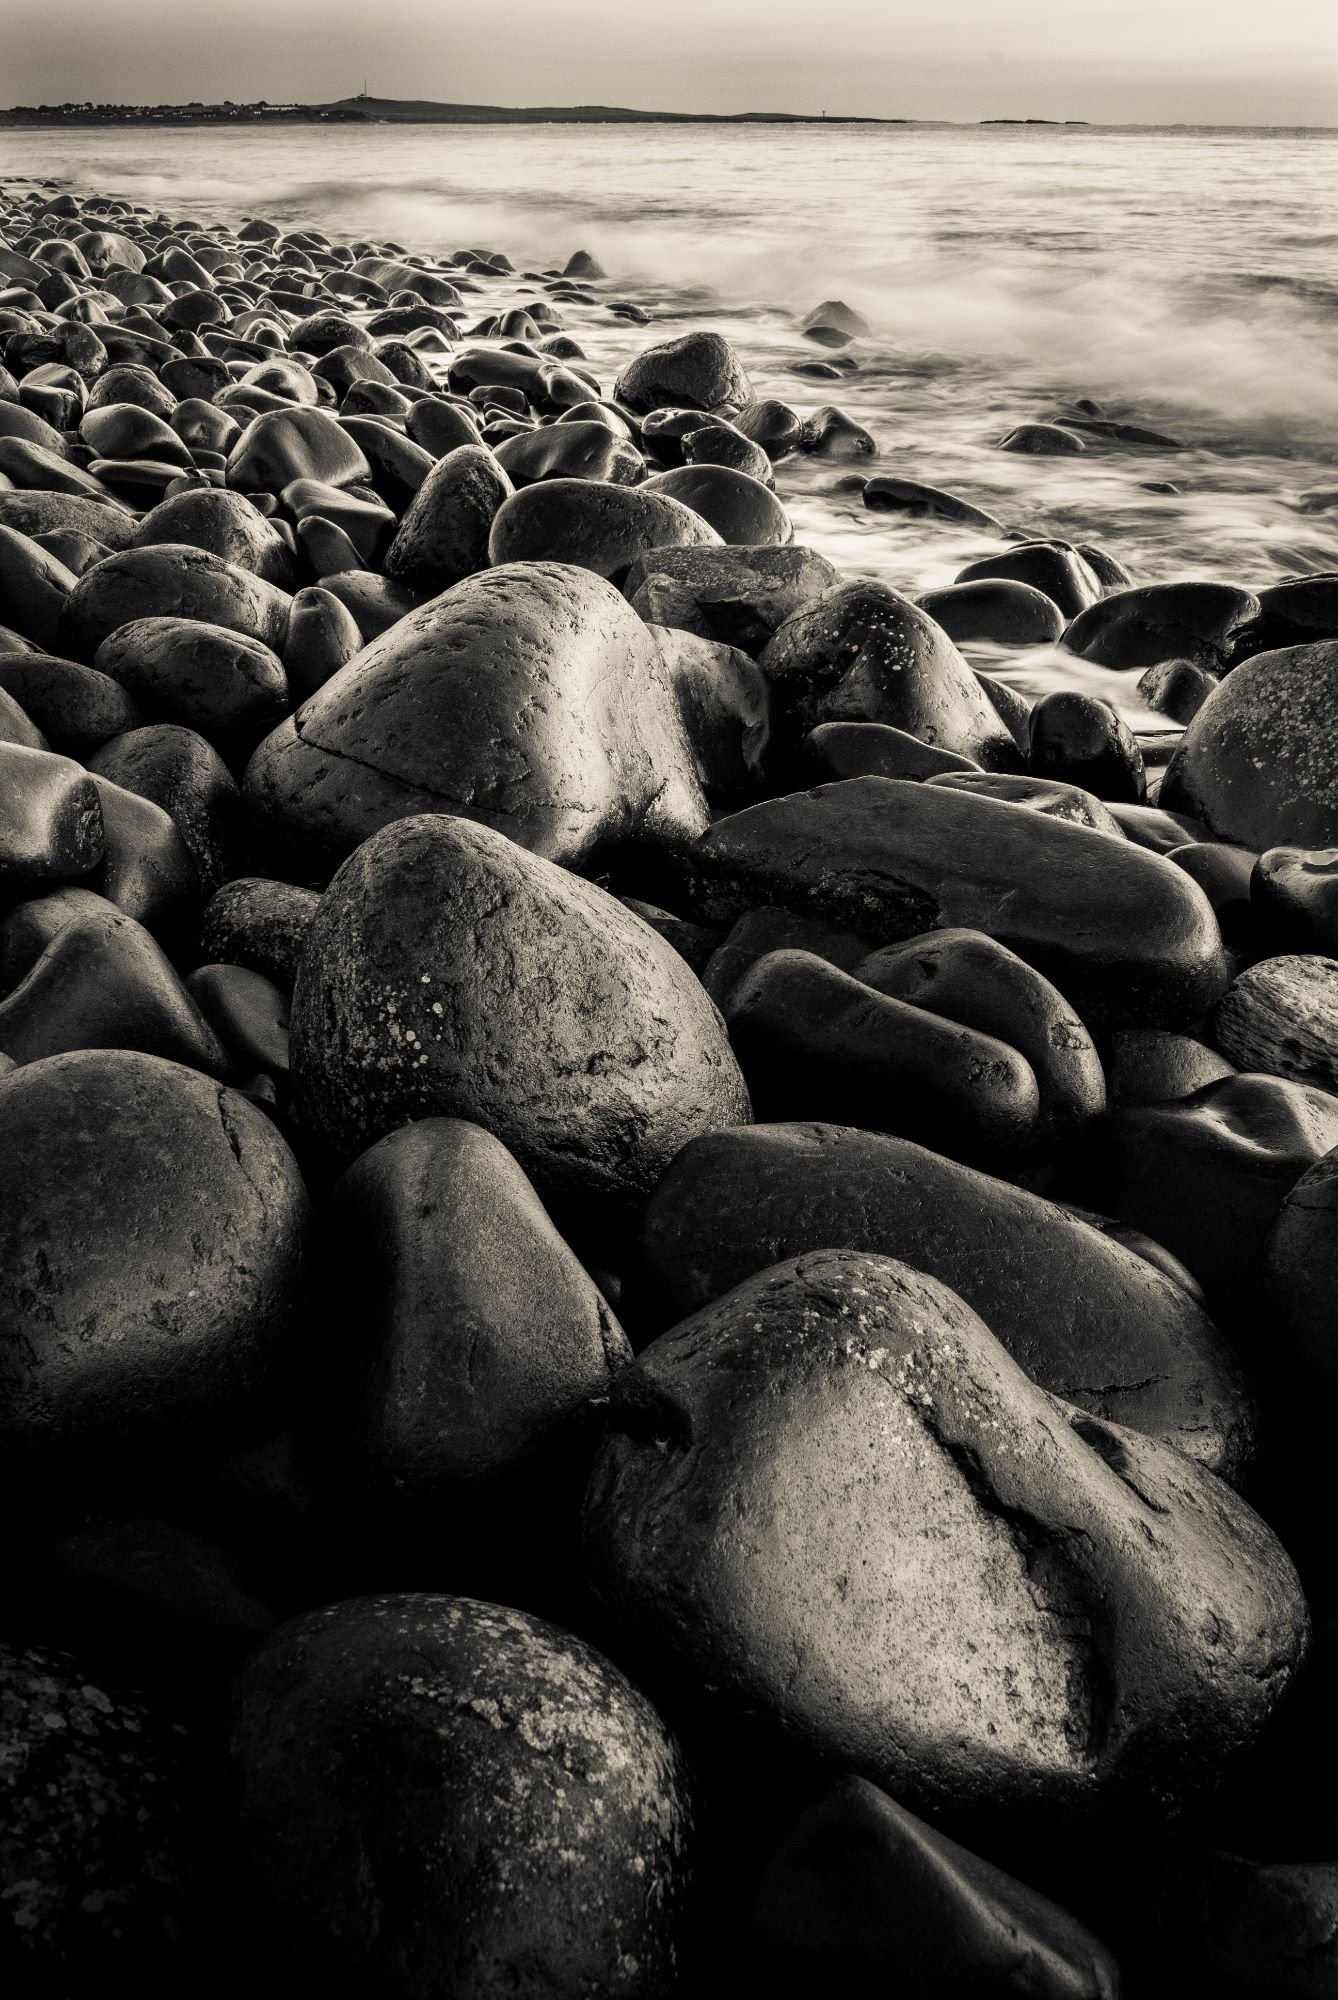 Rocks on a beach shine under the sunshine. The image is black and white